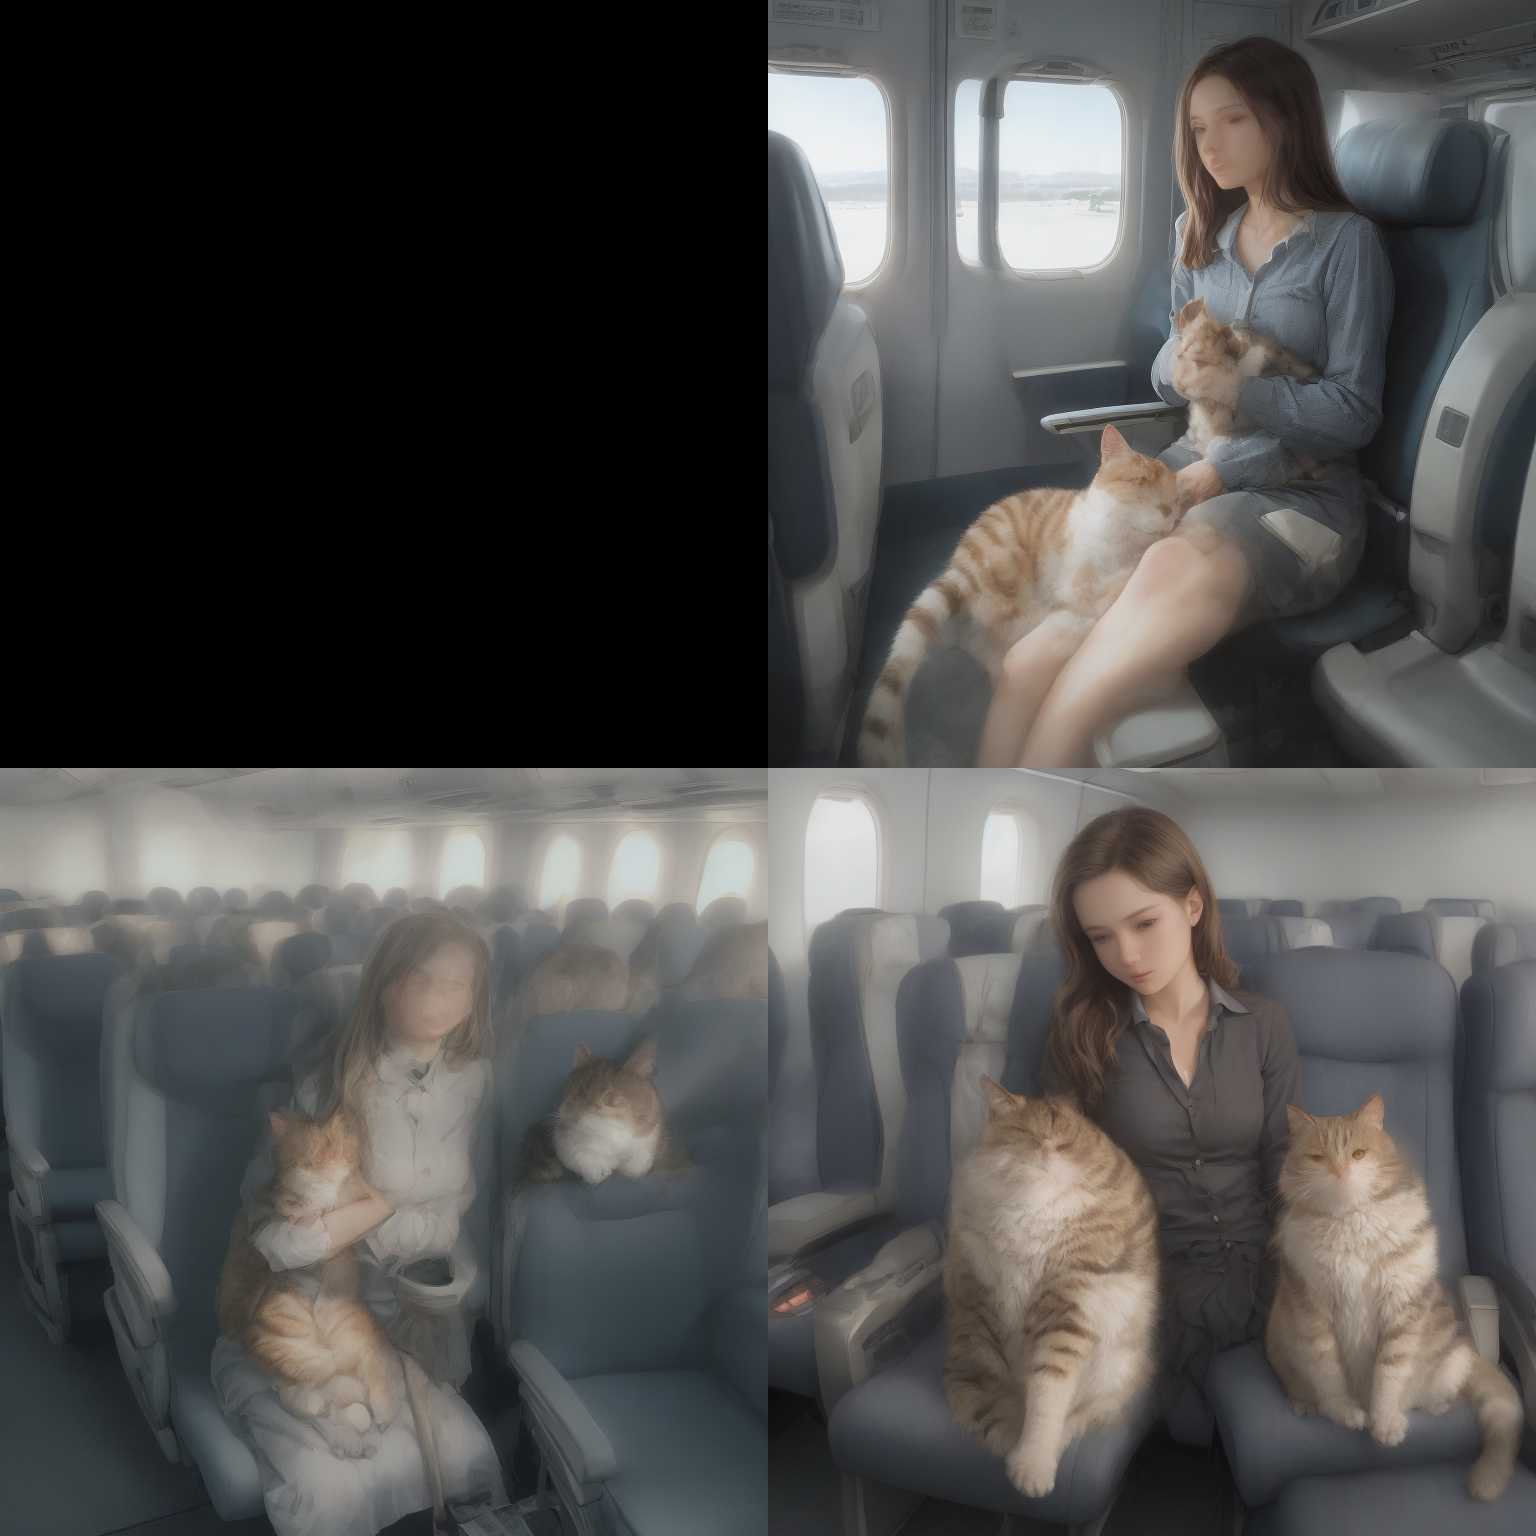 A passenger with her cat on the plane